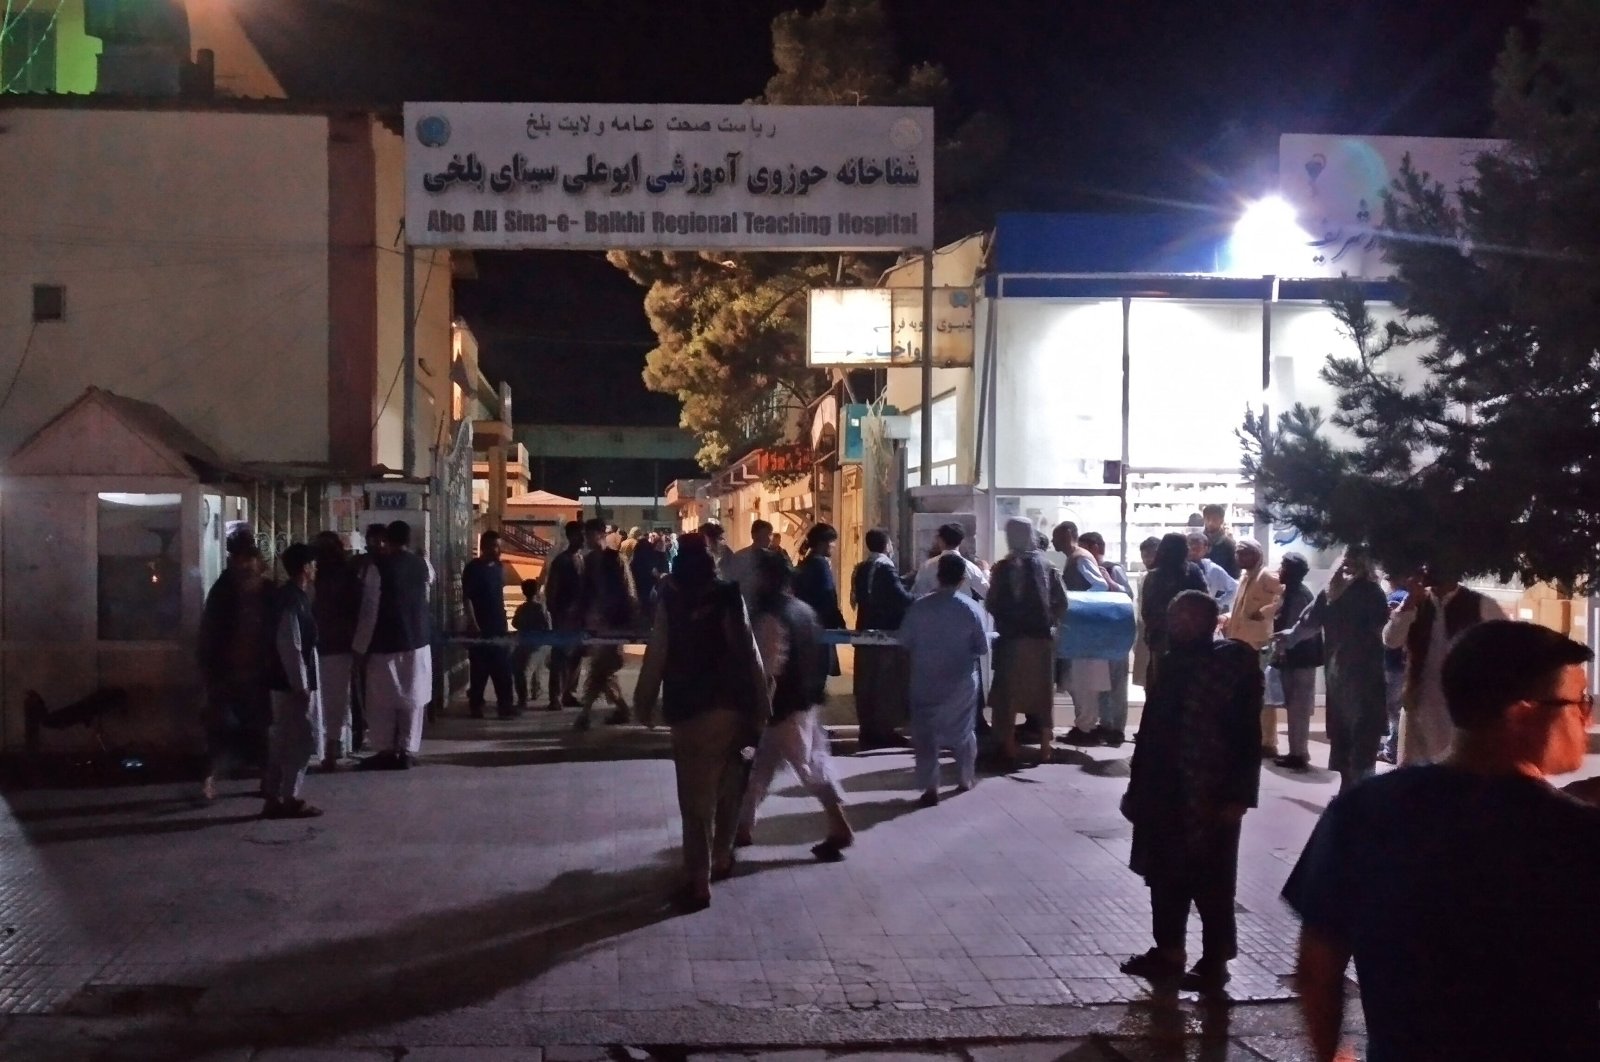 Relatives of bomb blasts victims gather outside a hospital in Mazar-i-Sharif, Afghanistan, May 25, 2022. (AFP Photo)